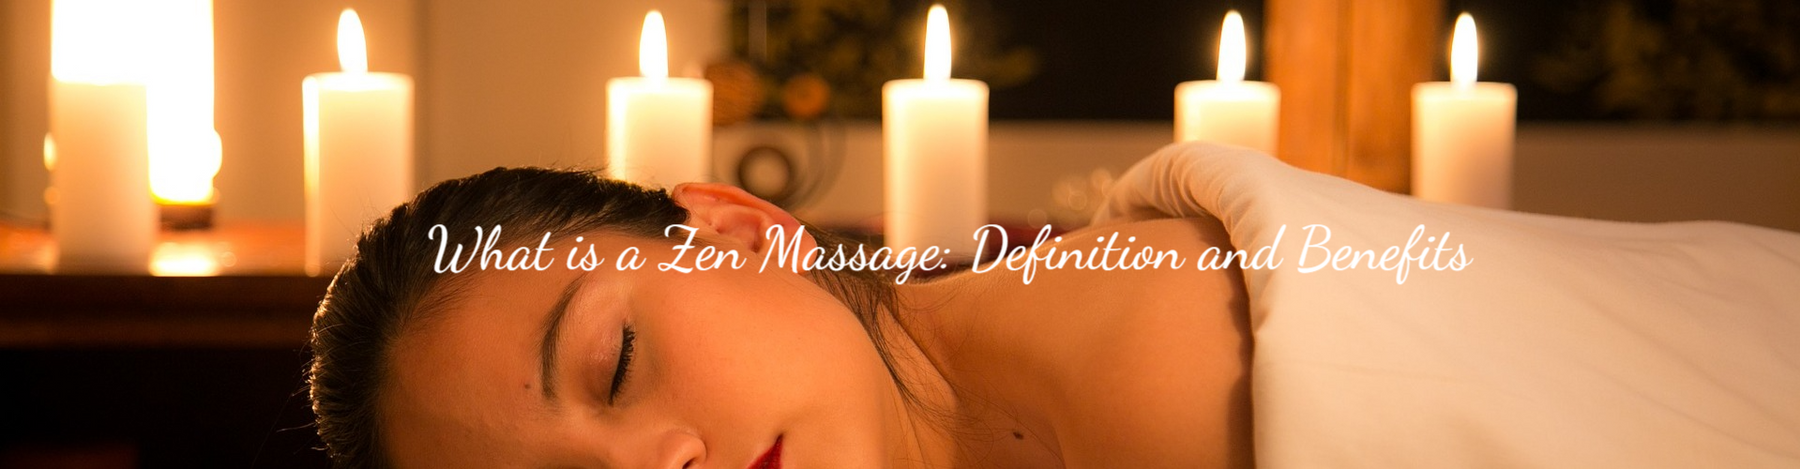 What is a Zen Massage: Definition and Benefits